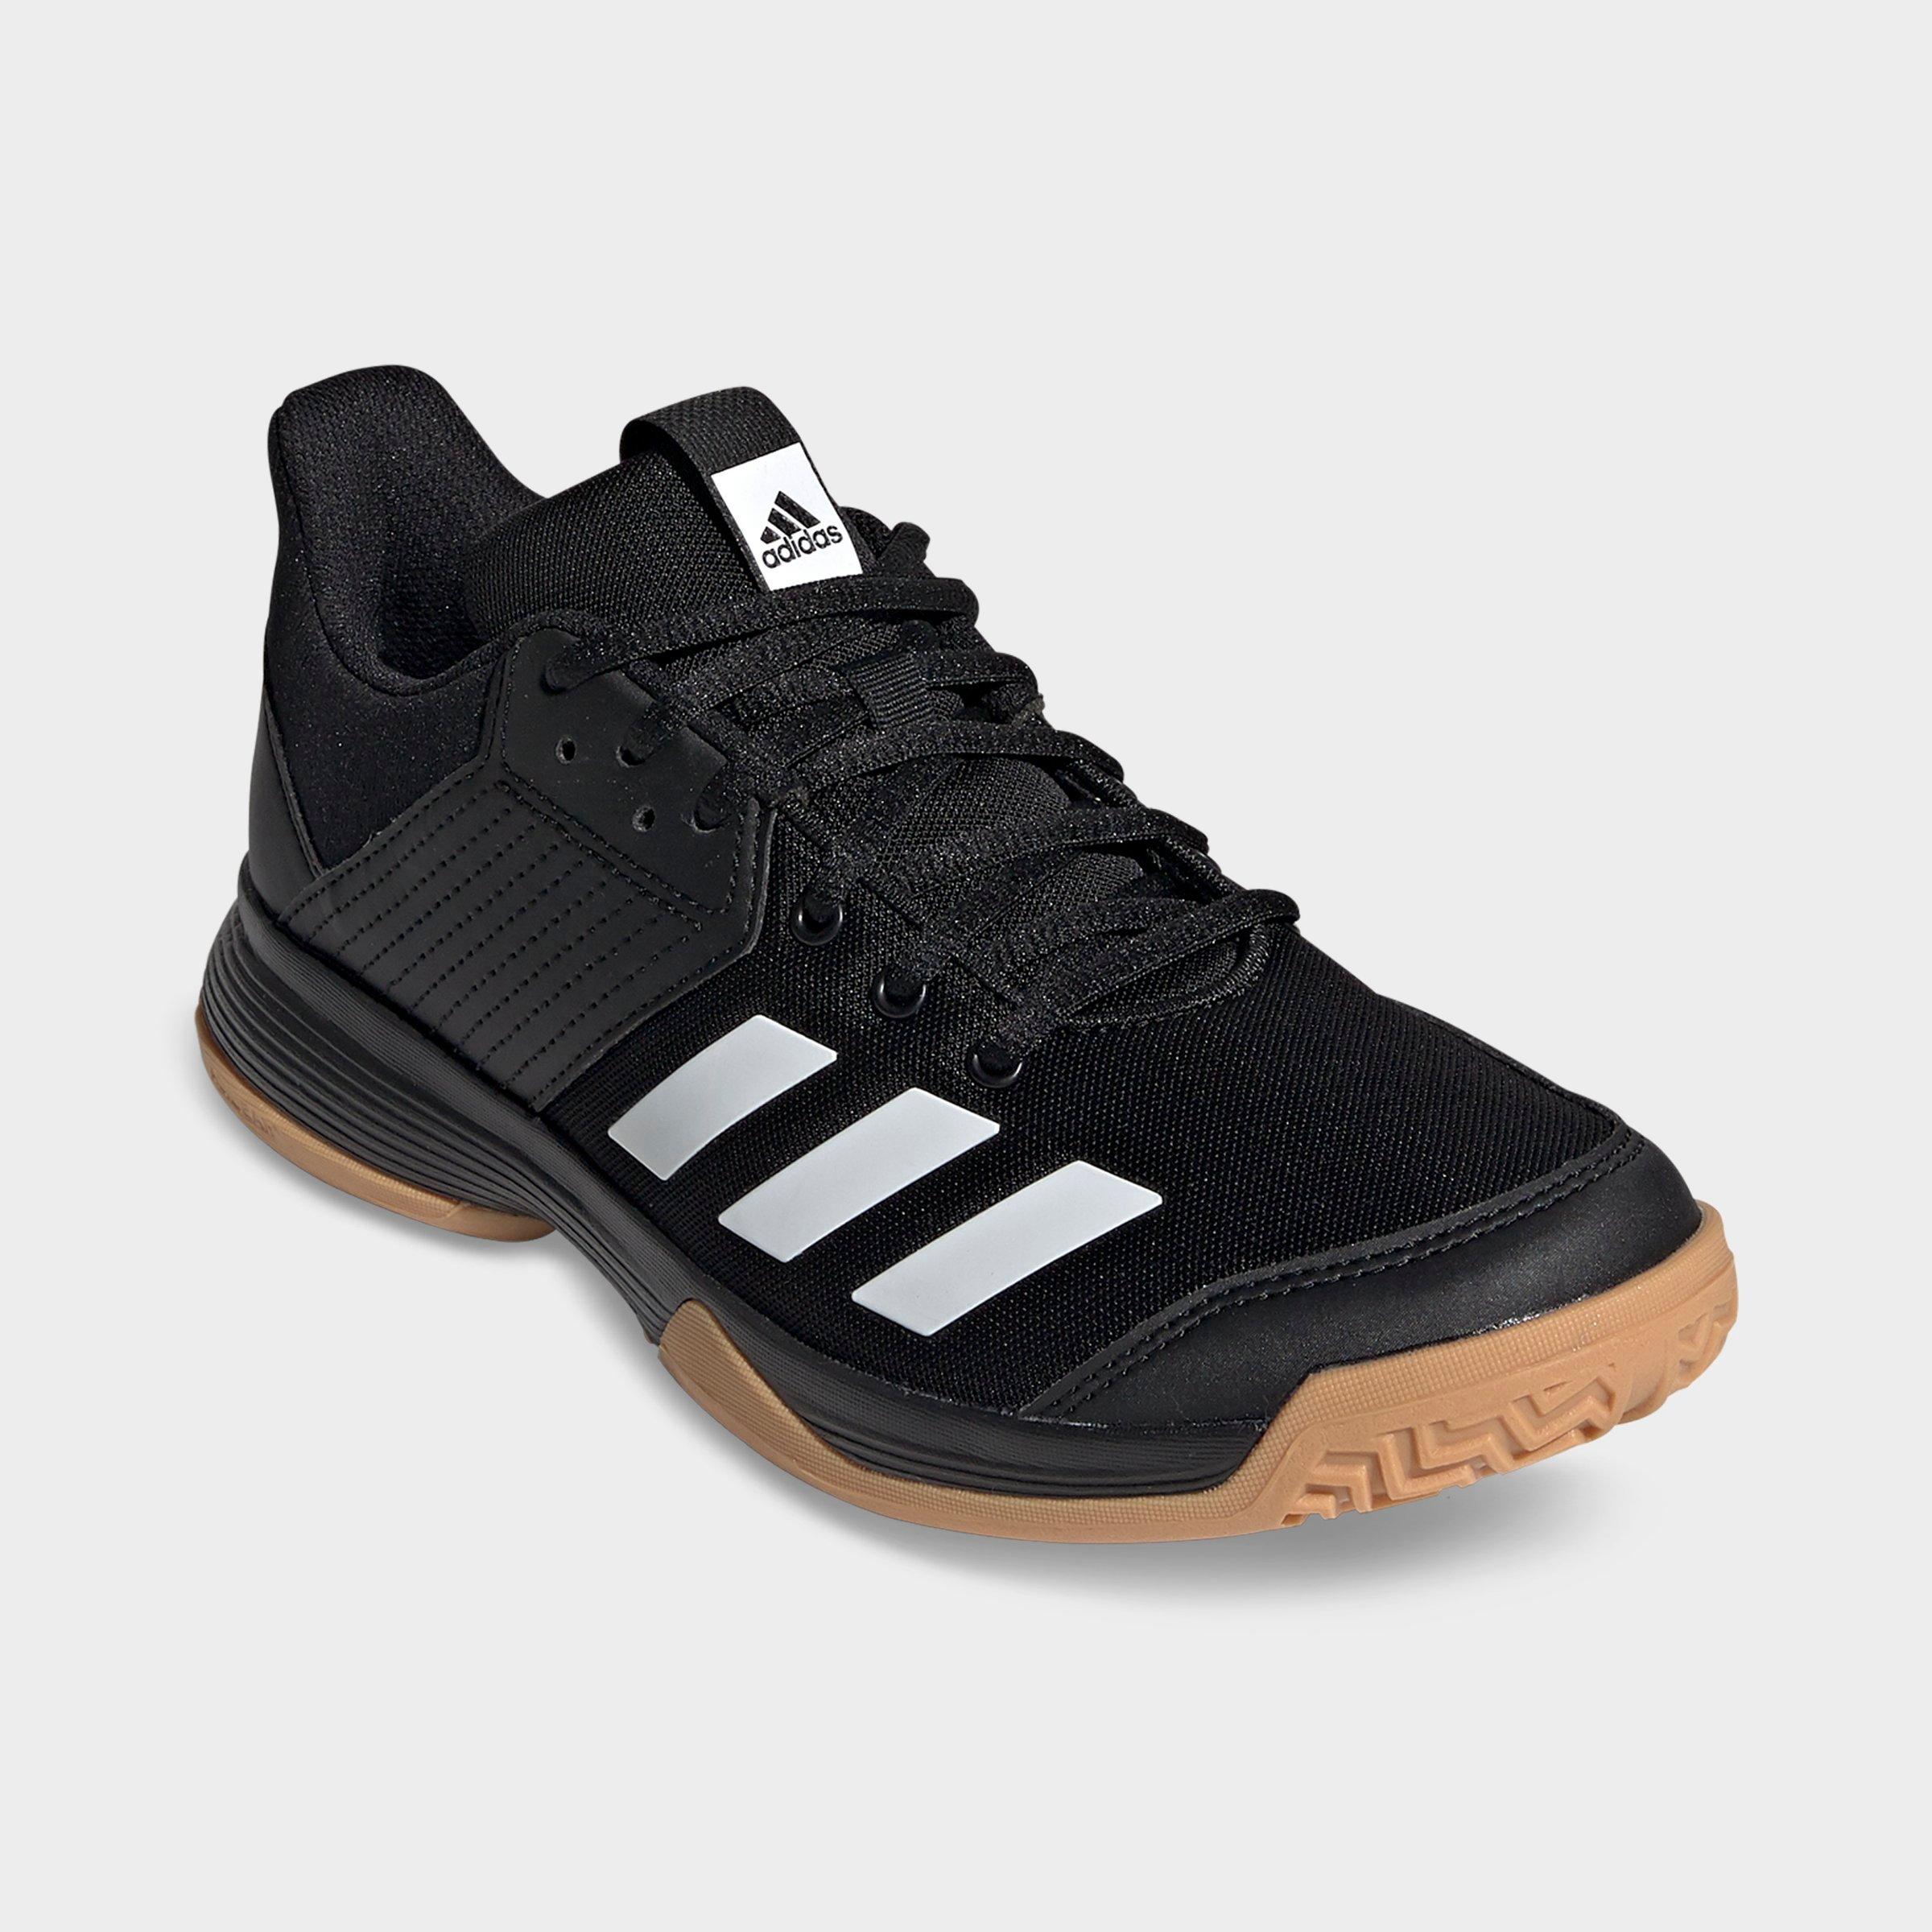 adidas ligra volleyball shoes